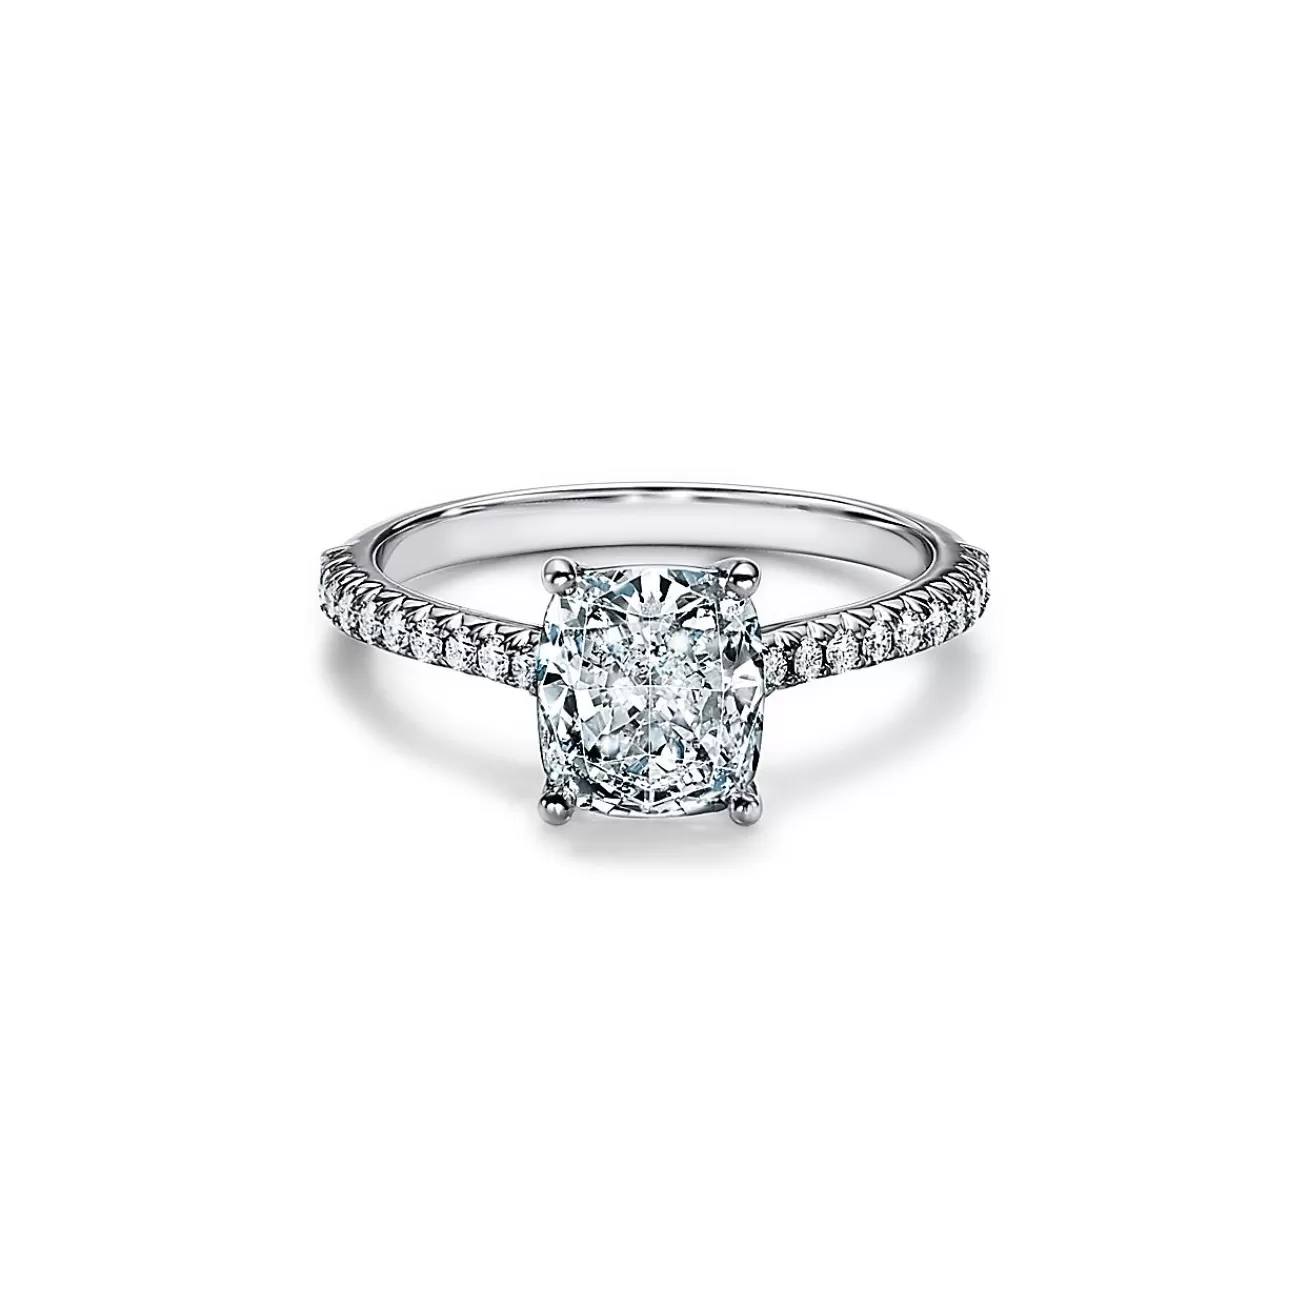 Tiffany & Co. Tiffany Novo® cushion-cut engagement ring with a pavé diamond band in platinum. | ^ Engagement Rings